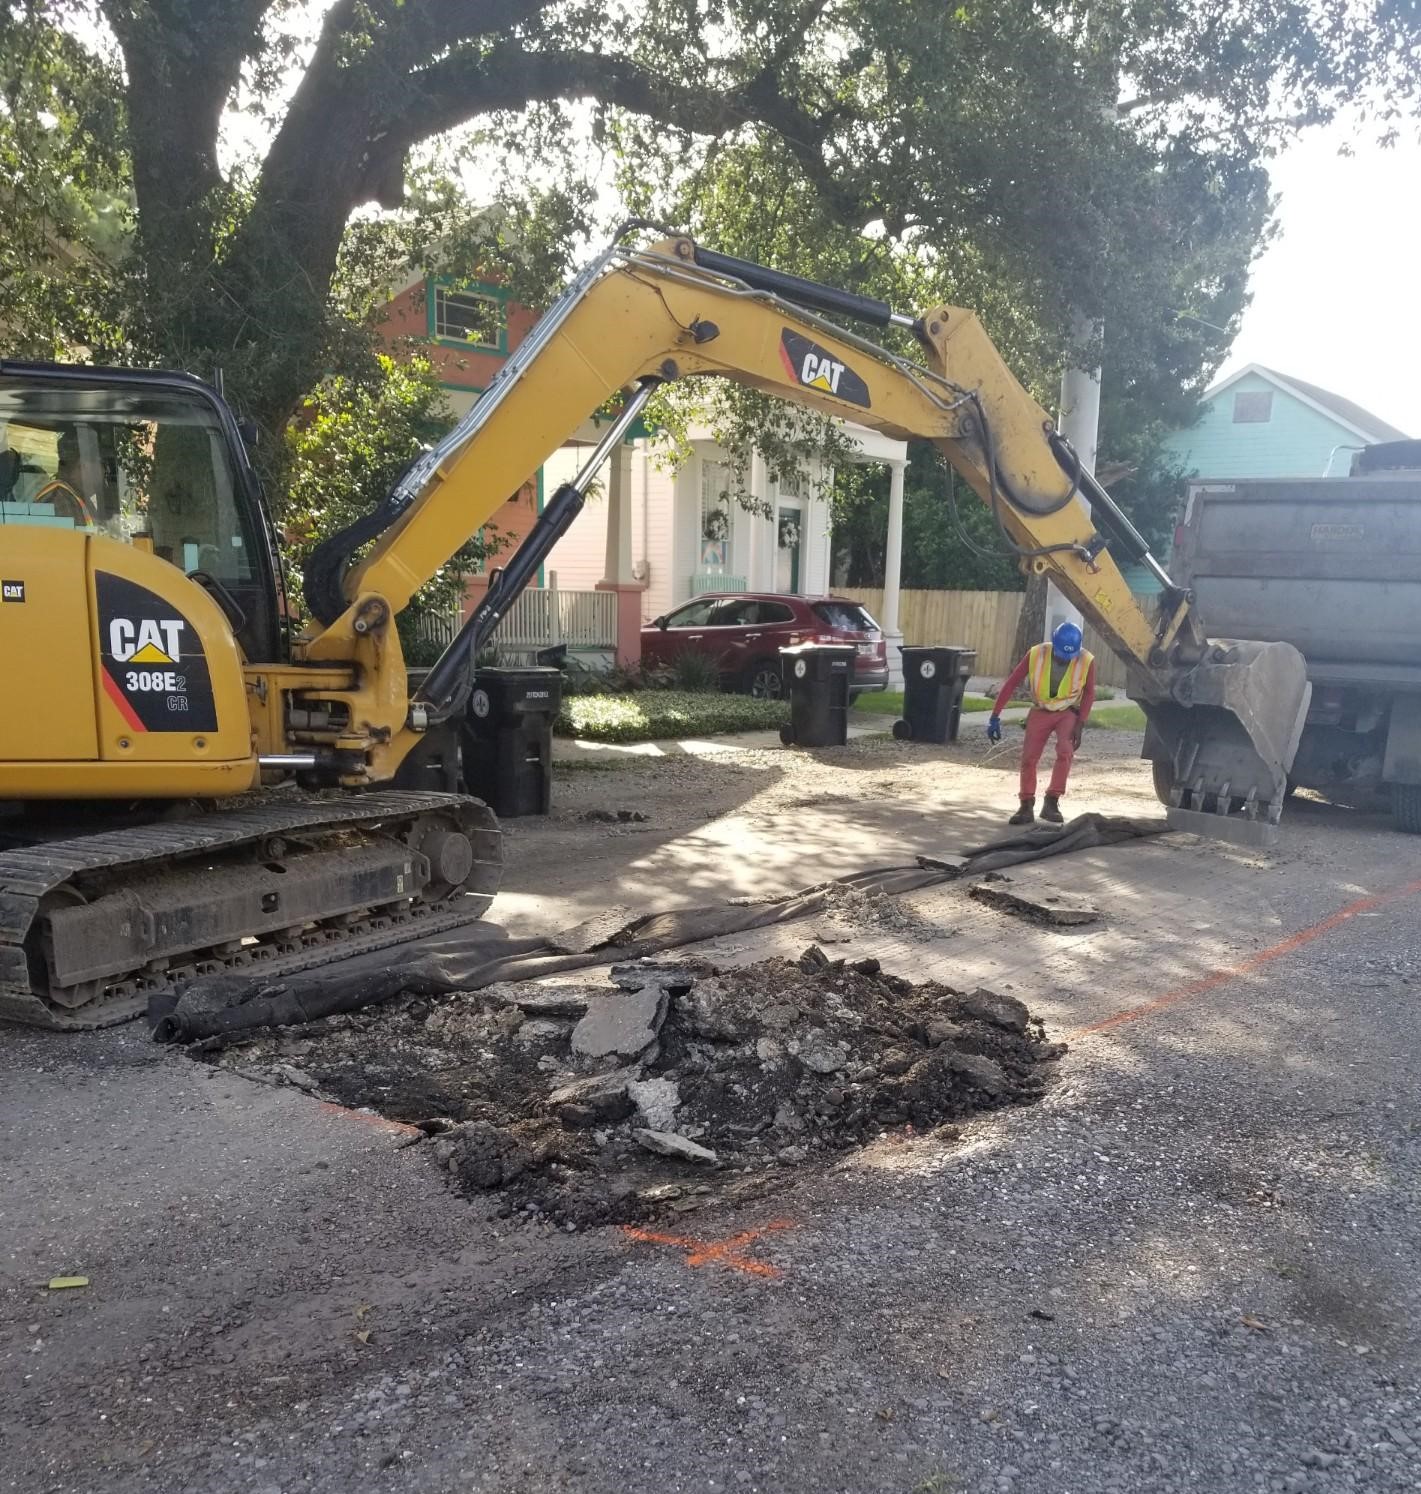 SEWER REPAIRS AND PAVEMENT RESTORATION COMPLETED AS PART OF HOLLYGROVE, LEONIDAS GROUP A PROJECT